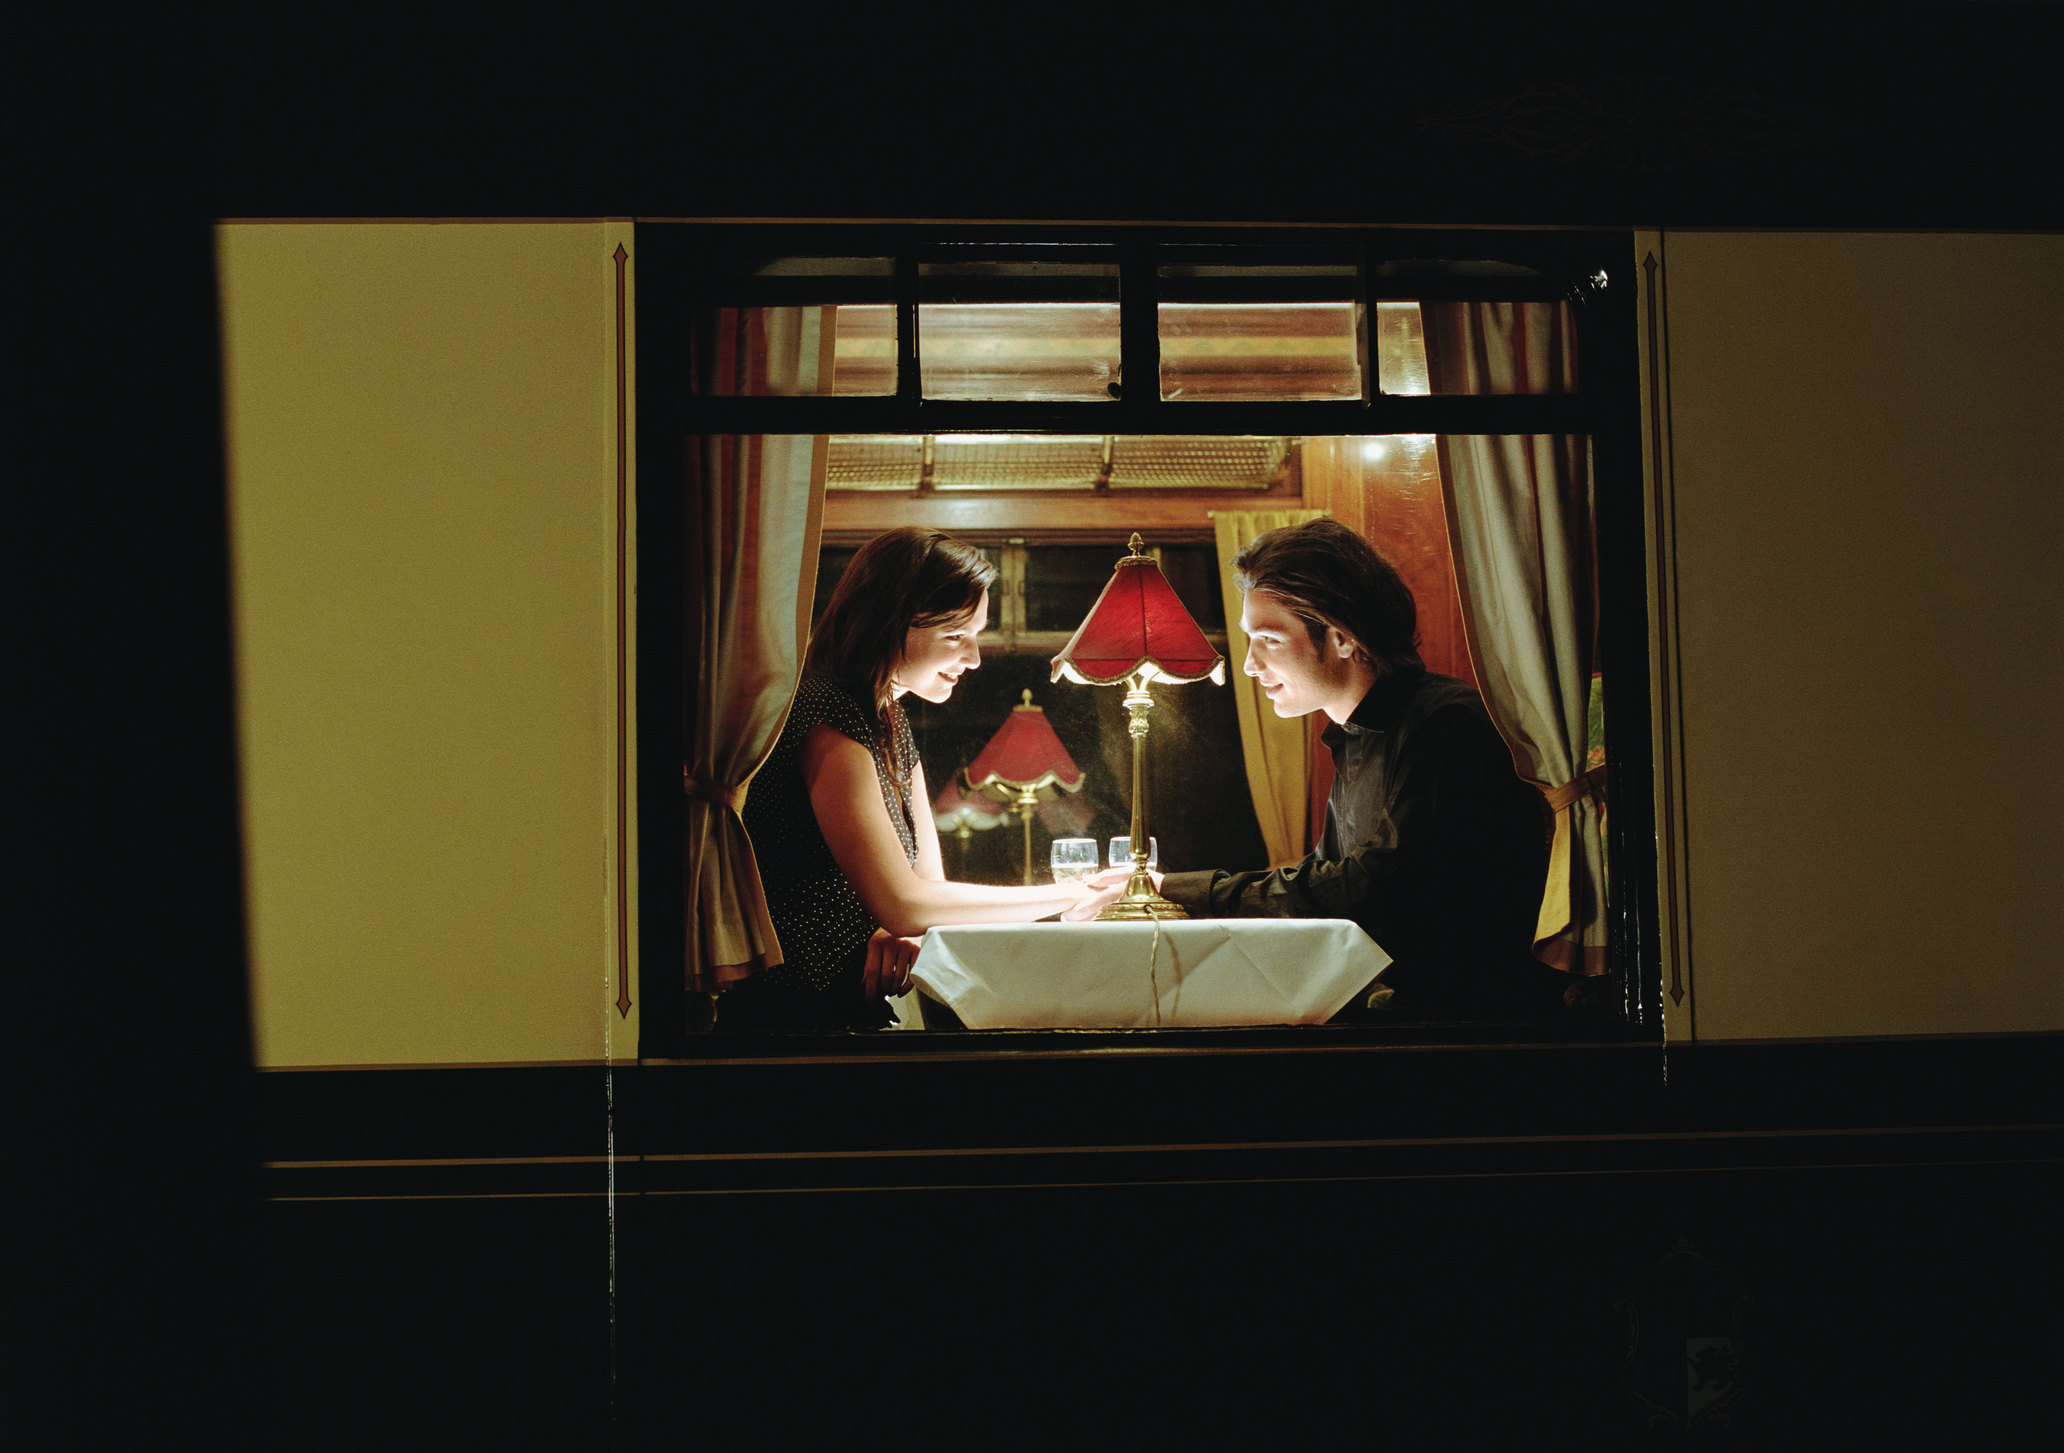 Two people having a candlelit dinner in an intimate setting, viewed through a window